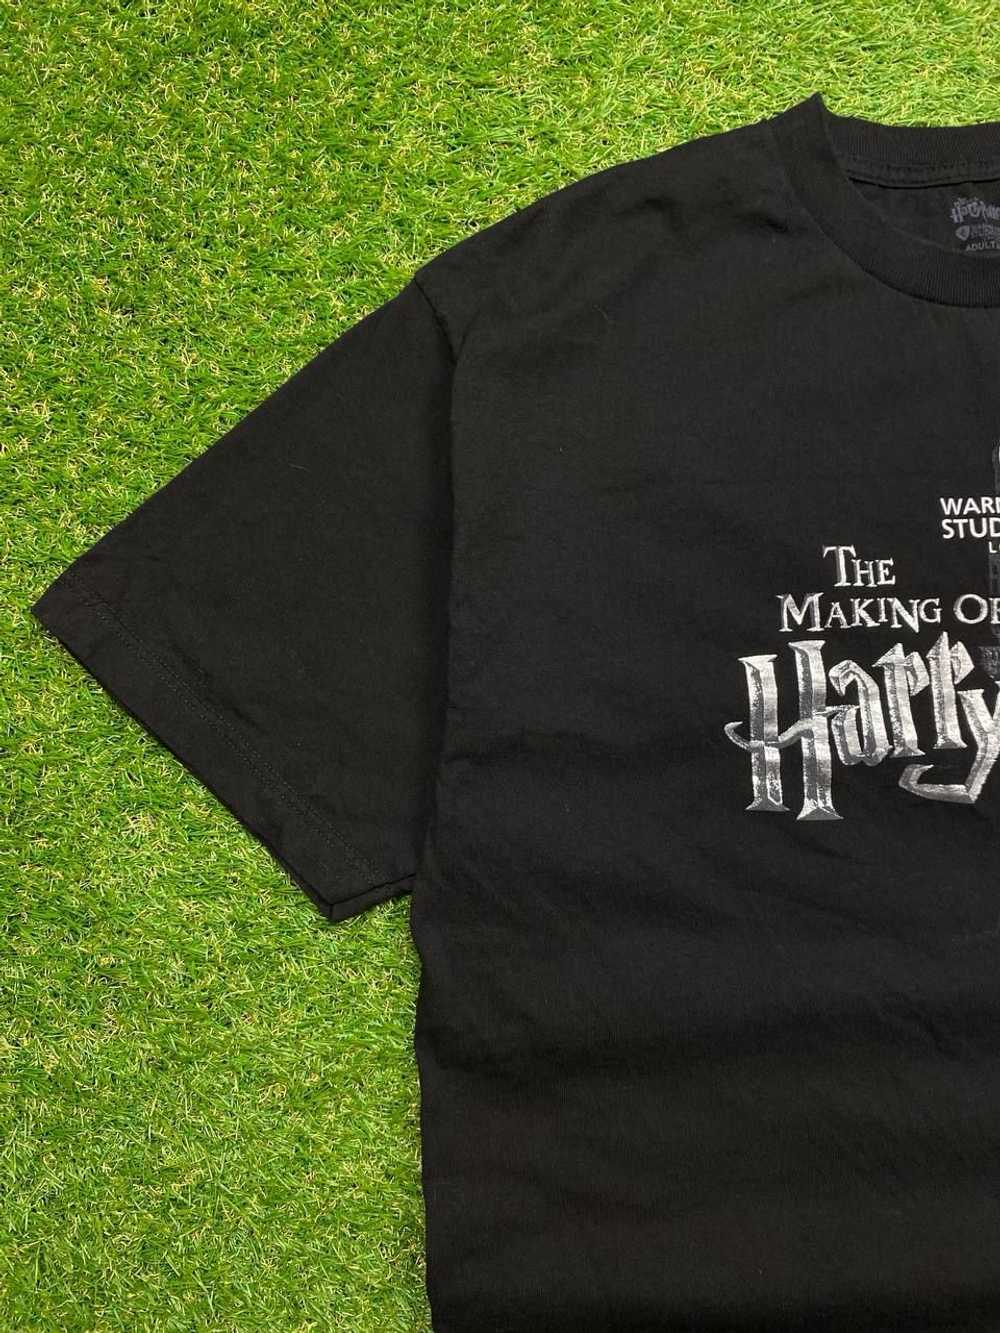 Band Tees × Movie × Vintage The Making of Harry P… - image 2